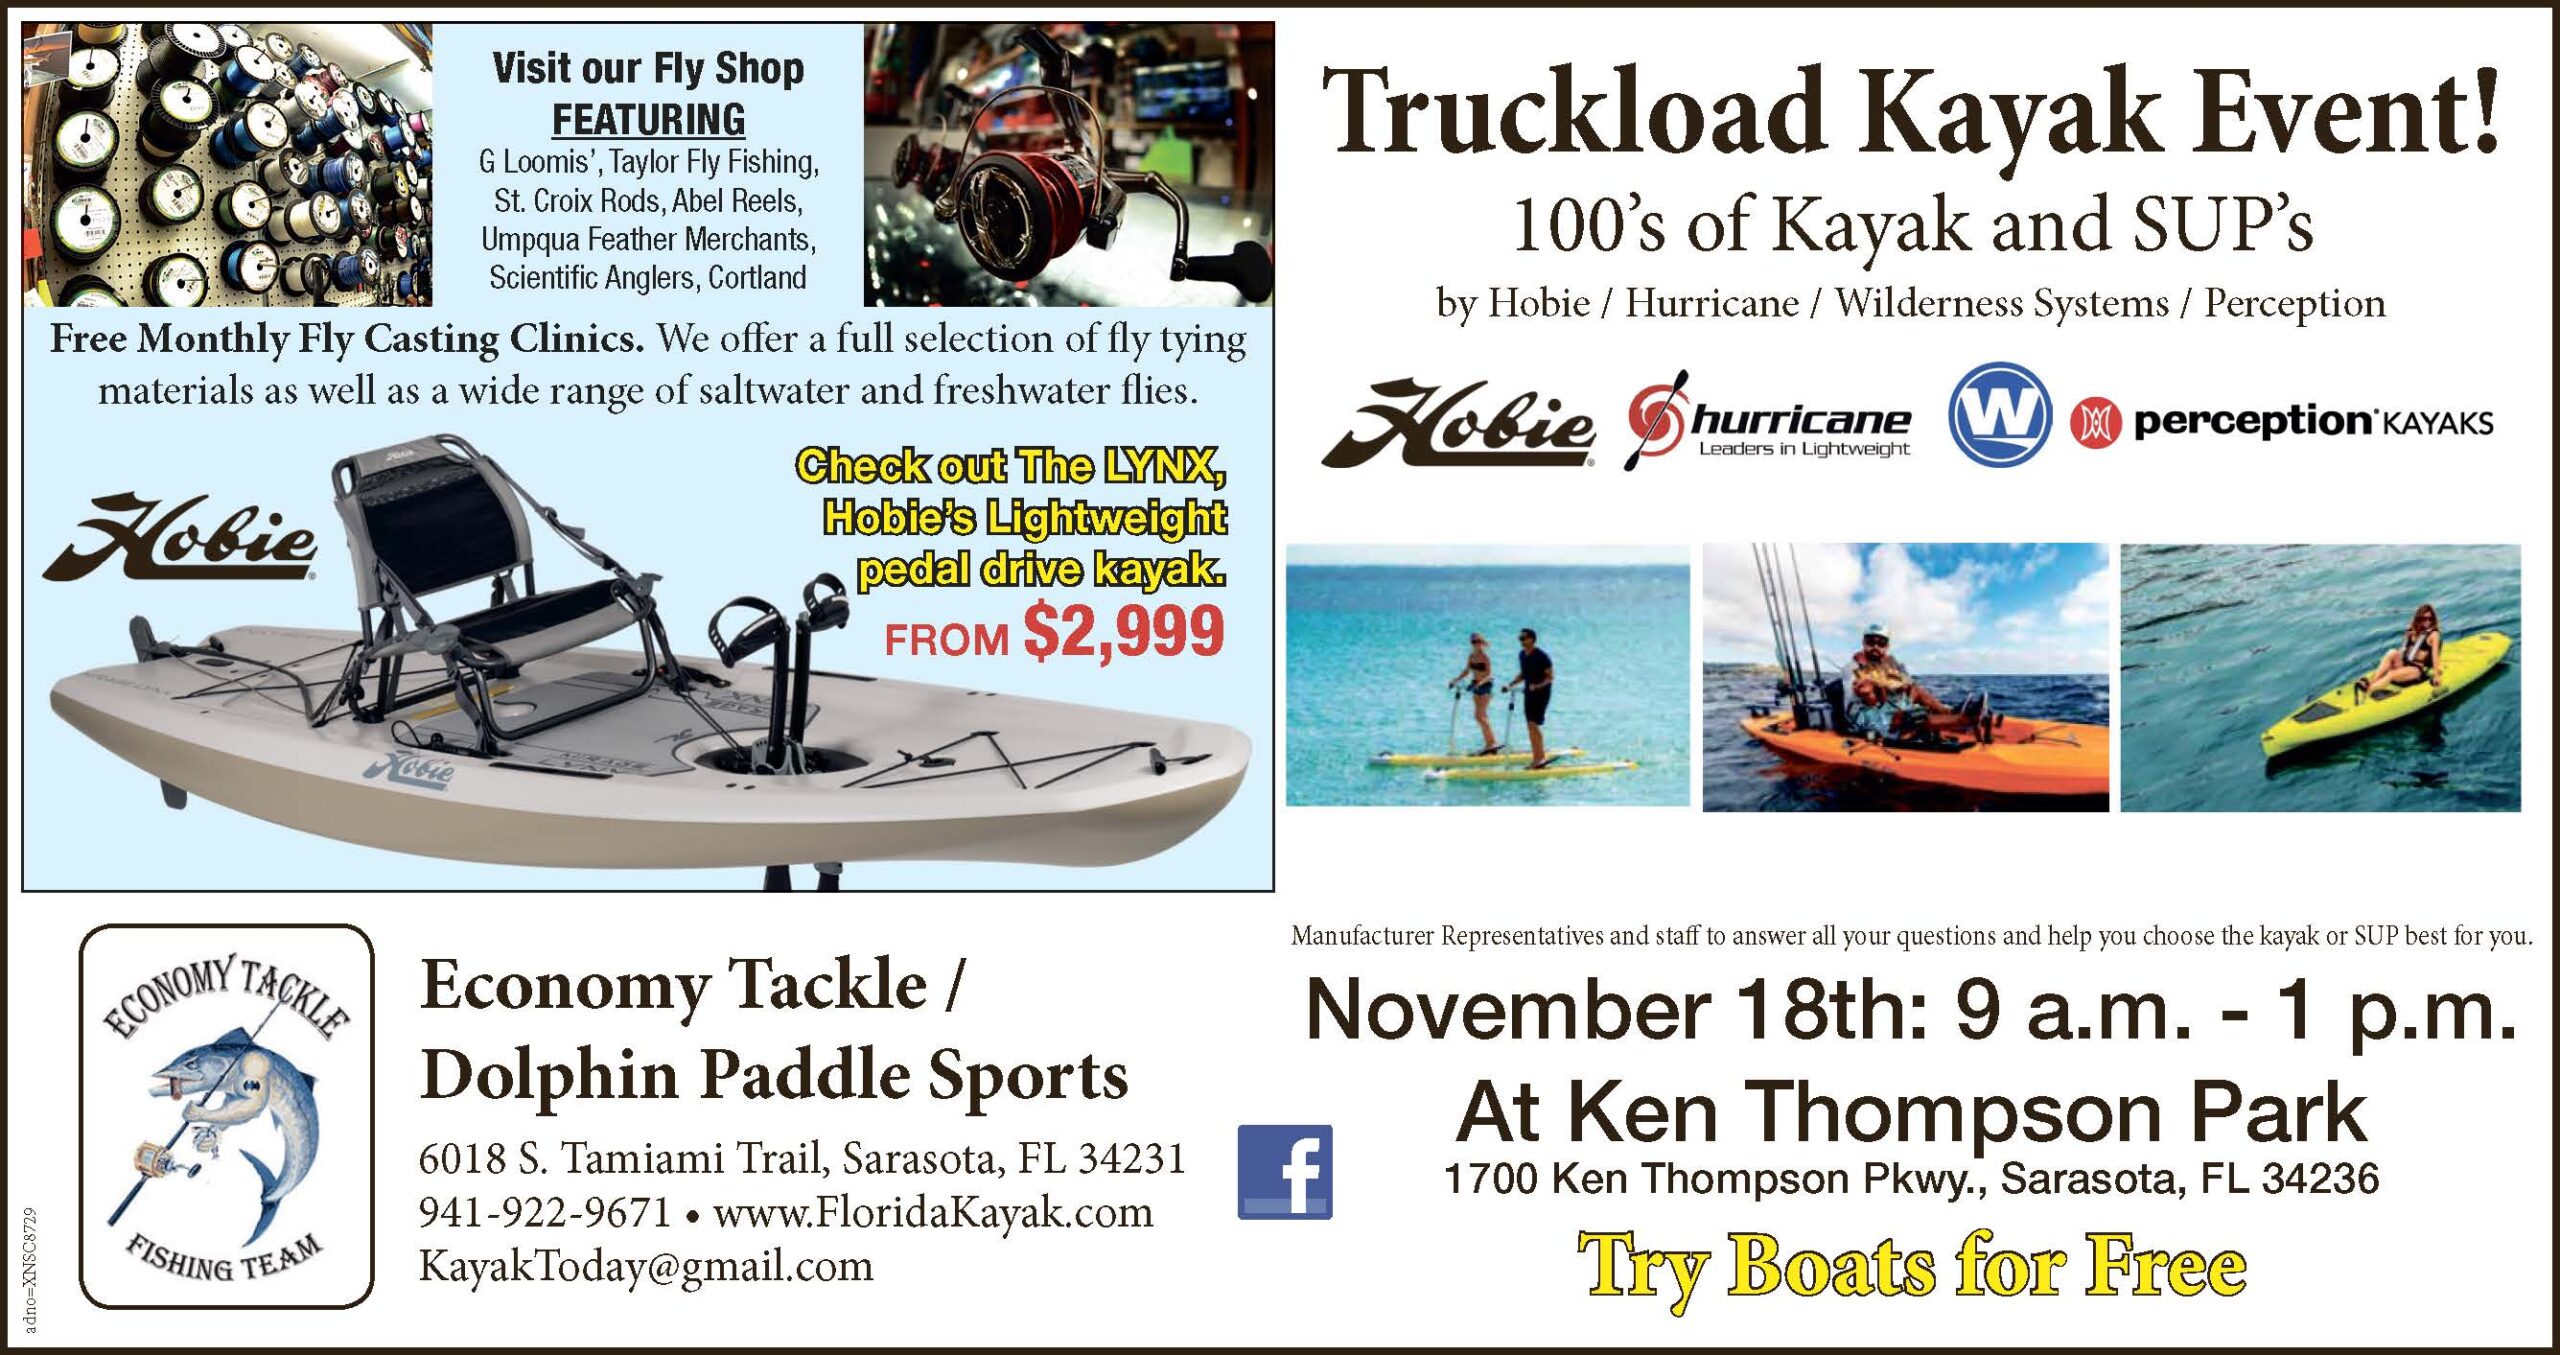 Paddle into Savings: The Truckload Kayak Event Sale is Here